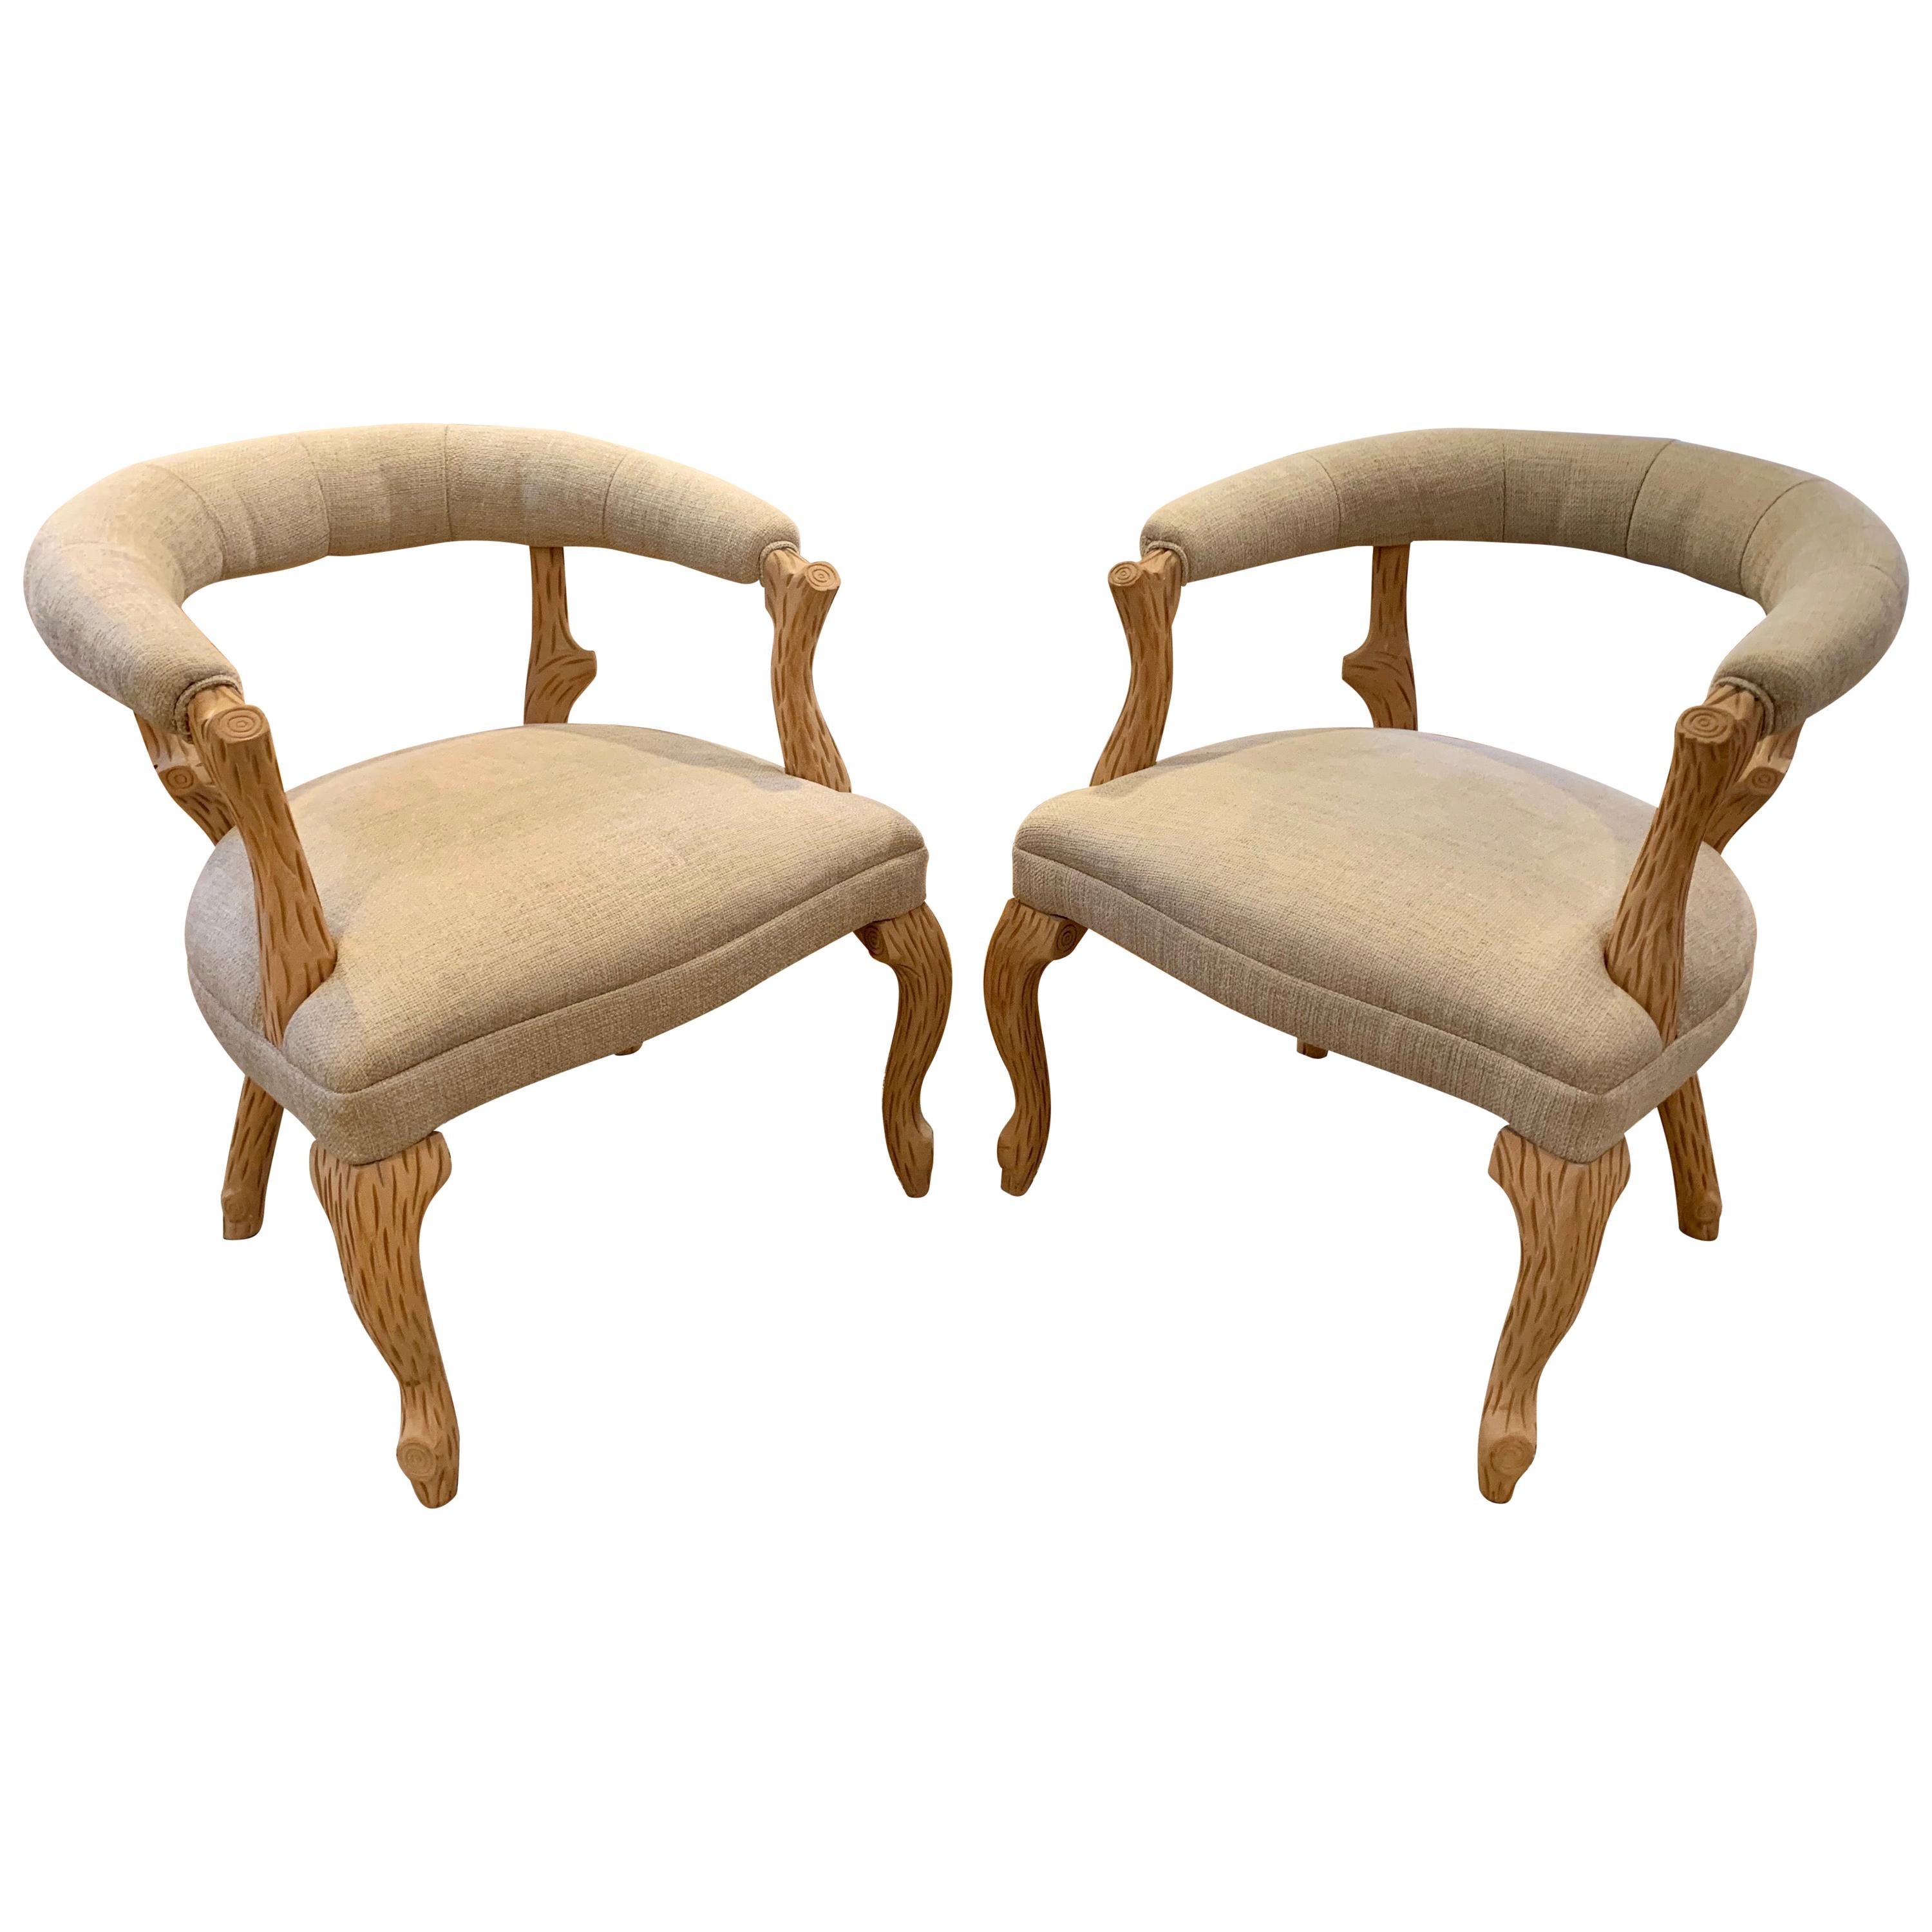 Pair of French Faux Bois Side-chairs For Sale